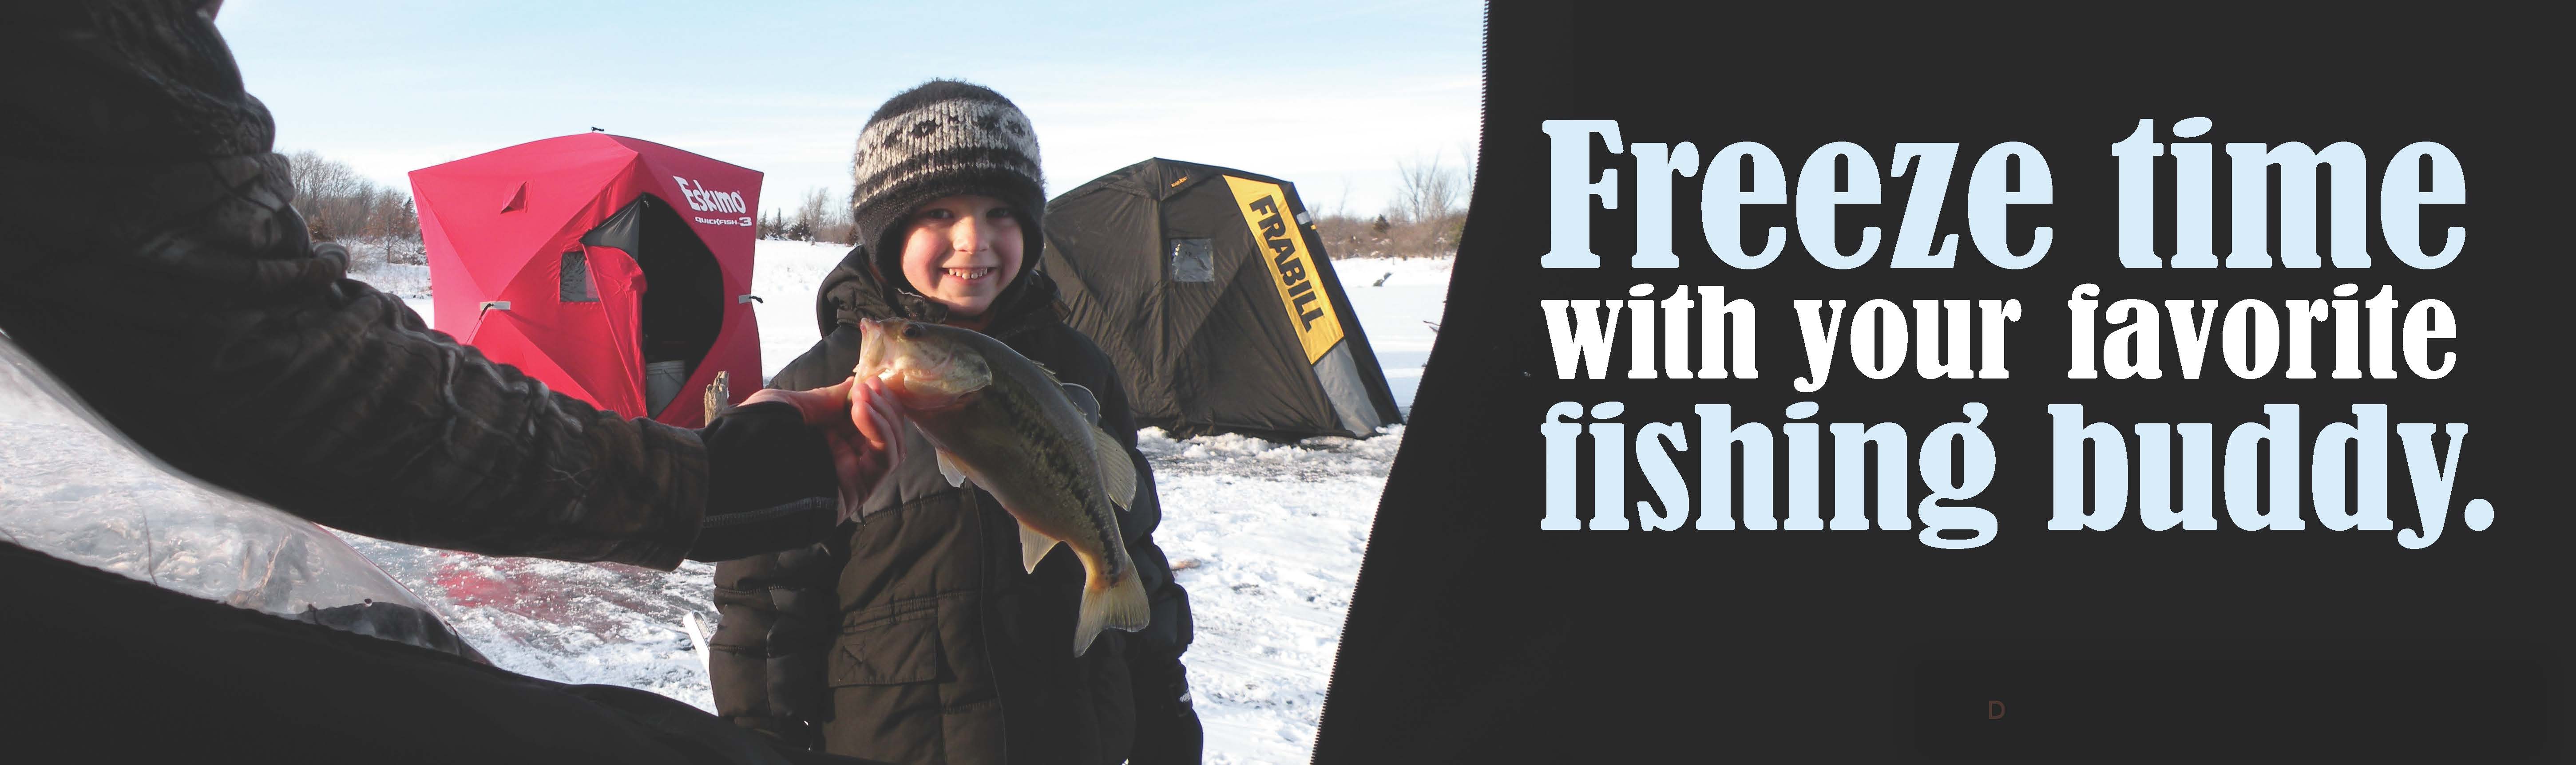 Keeping minnows from freezing all day. - Ice Fishing Forum - Ice Fishing  Forum